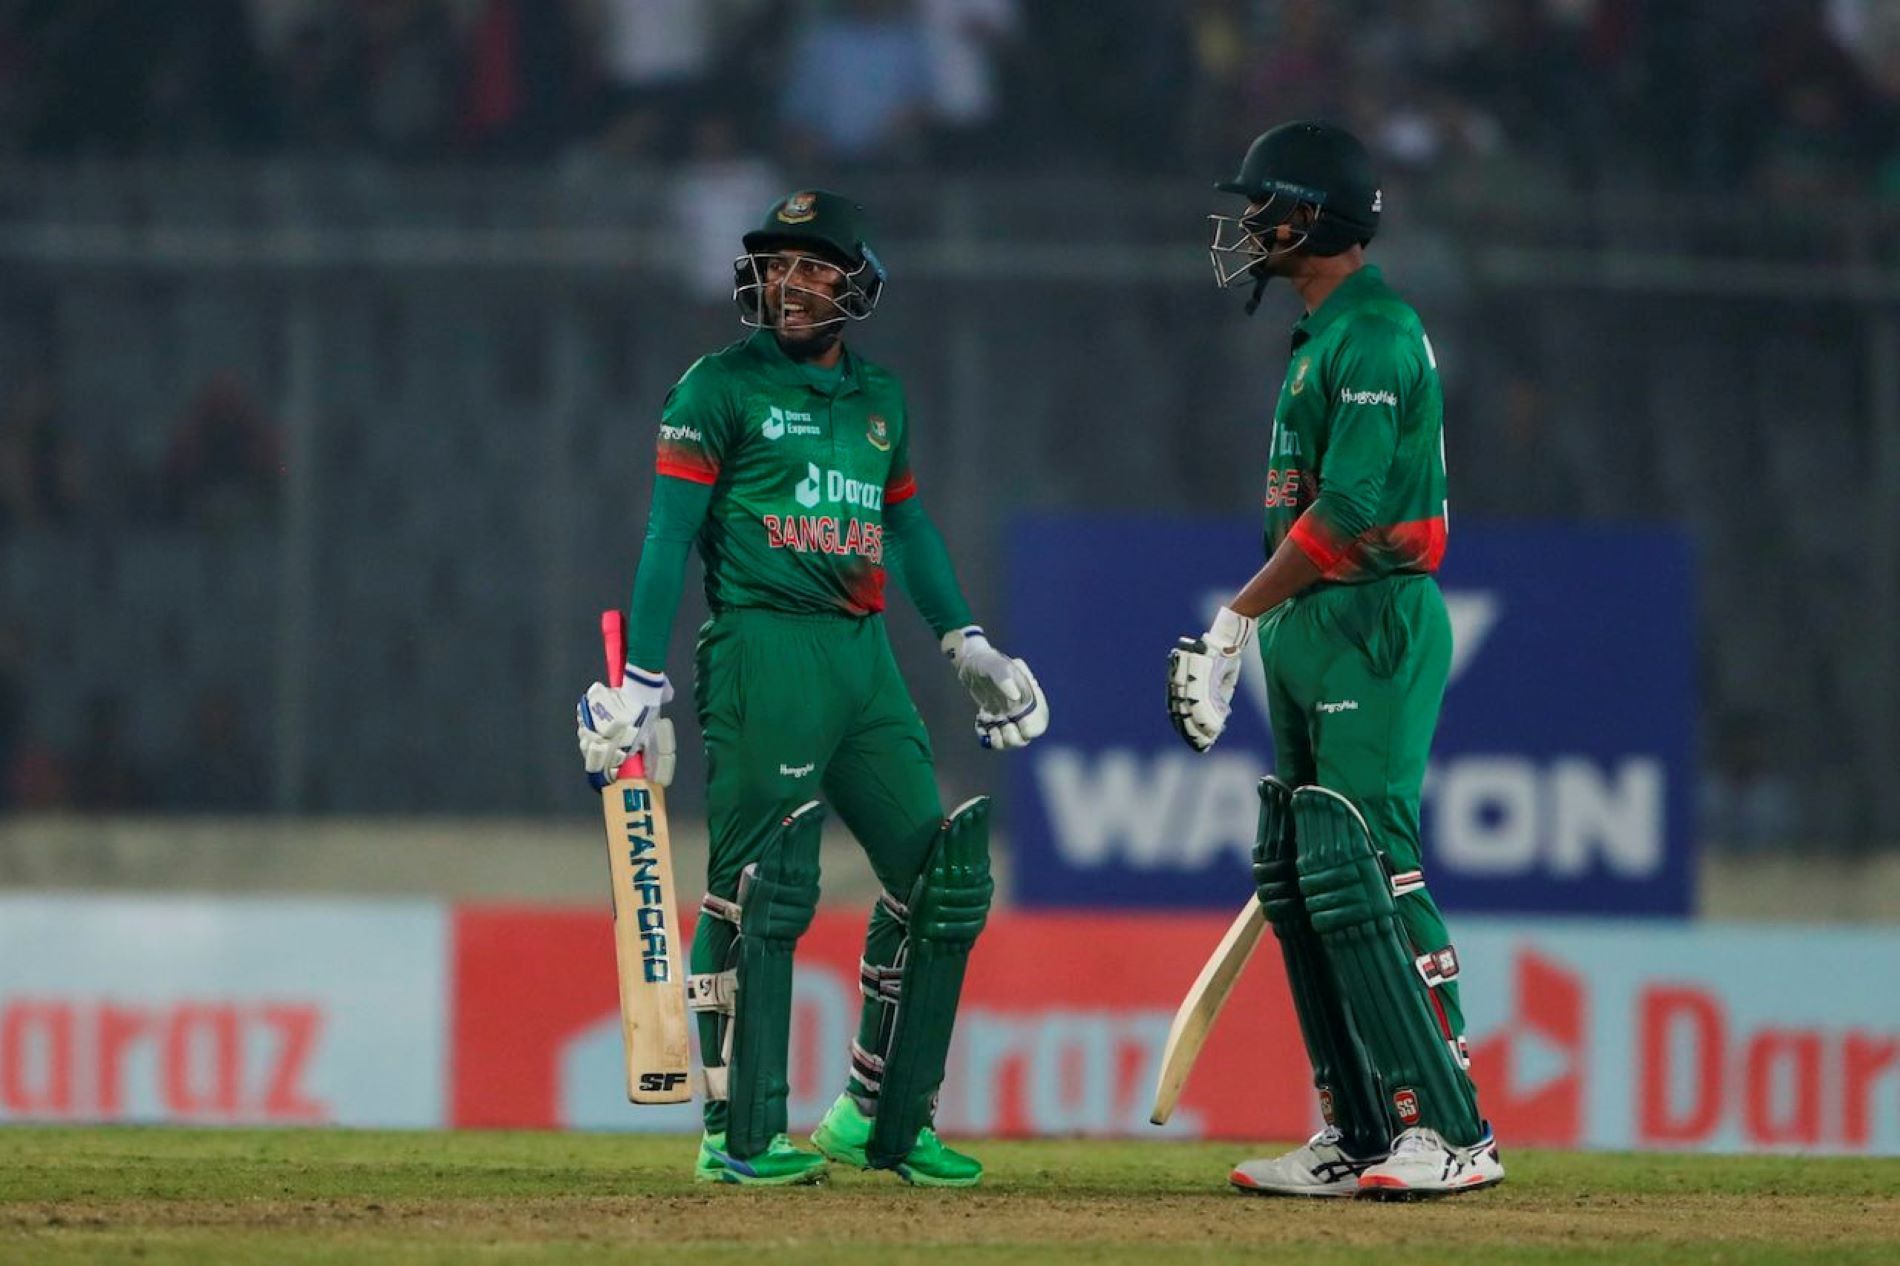 The final pair for Bangladesh stole victory from Team India in the first ODI last year.